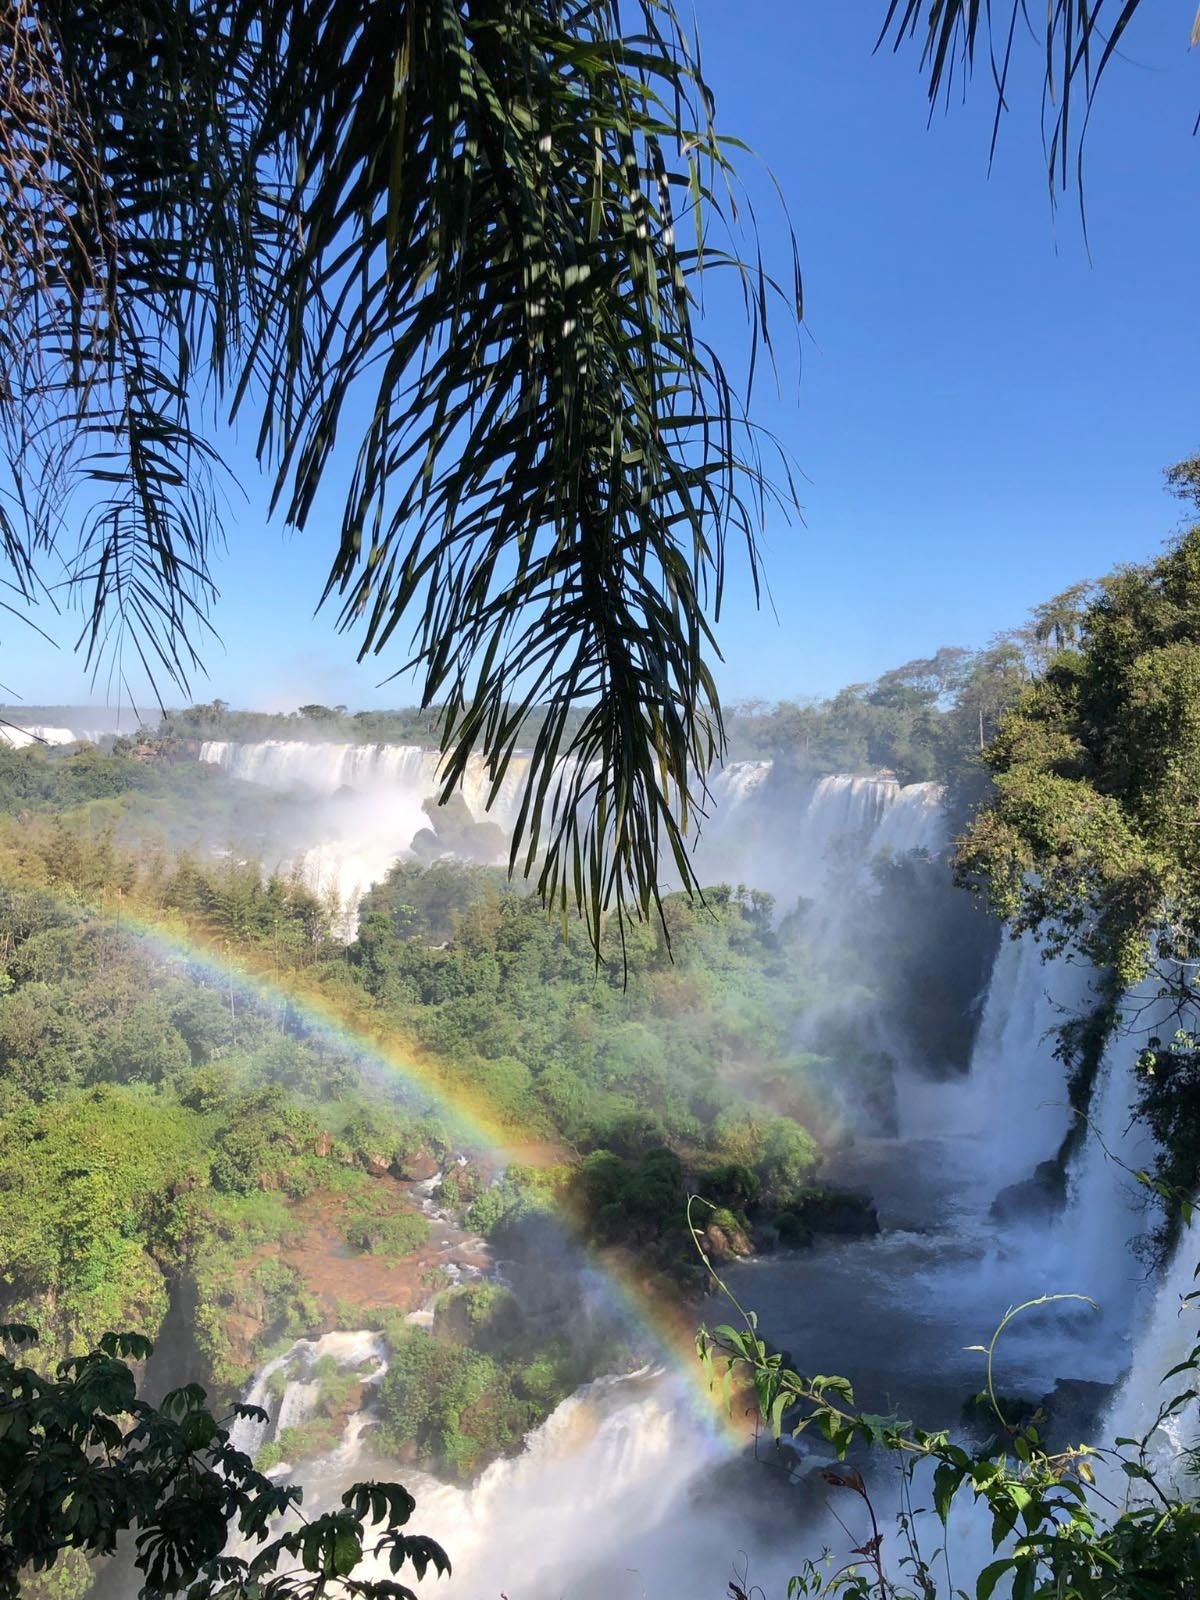 View of Iguaçu Falls with a rainbow over it in Argentina.